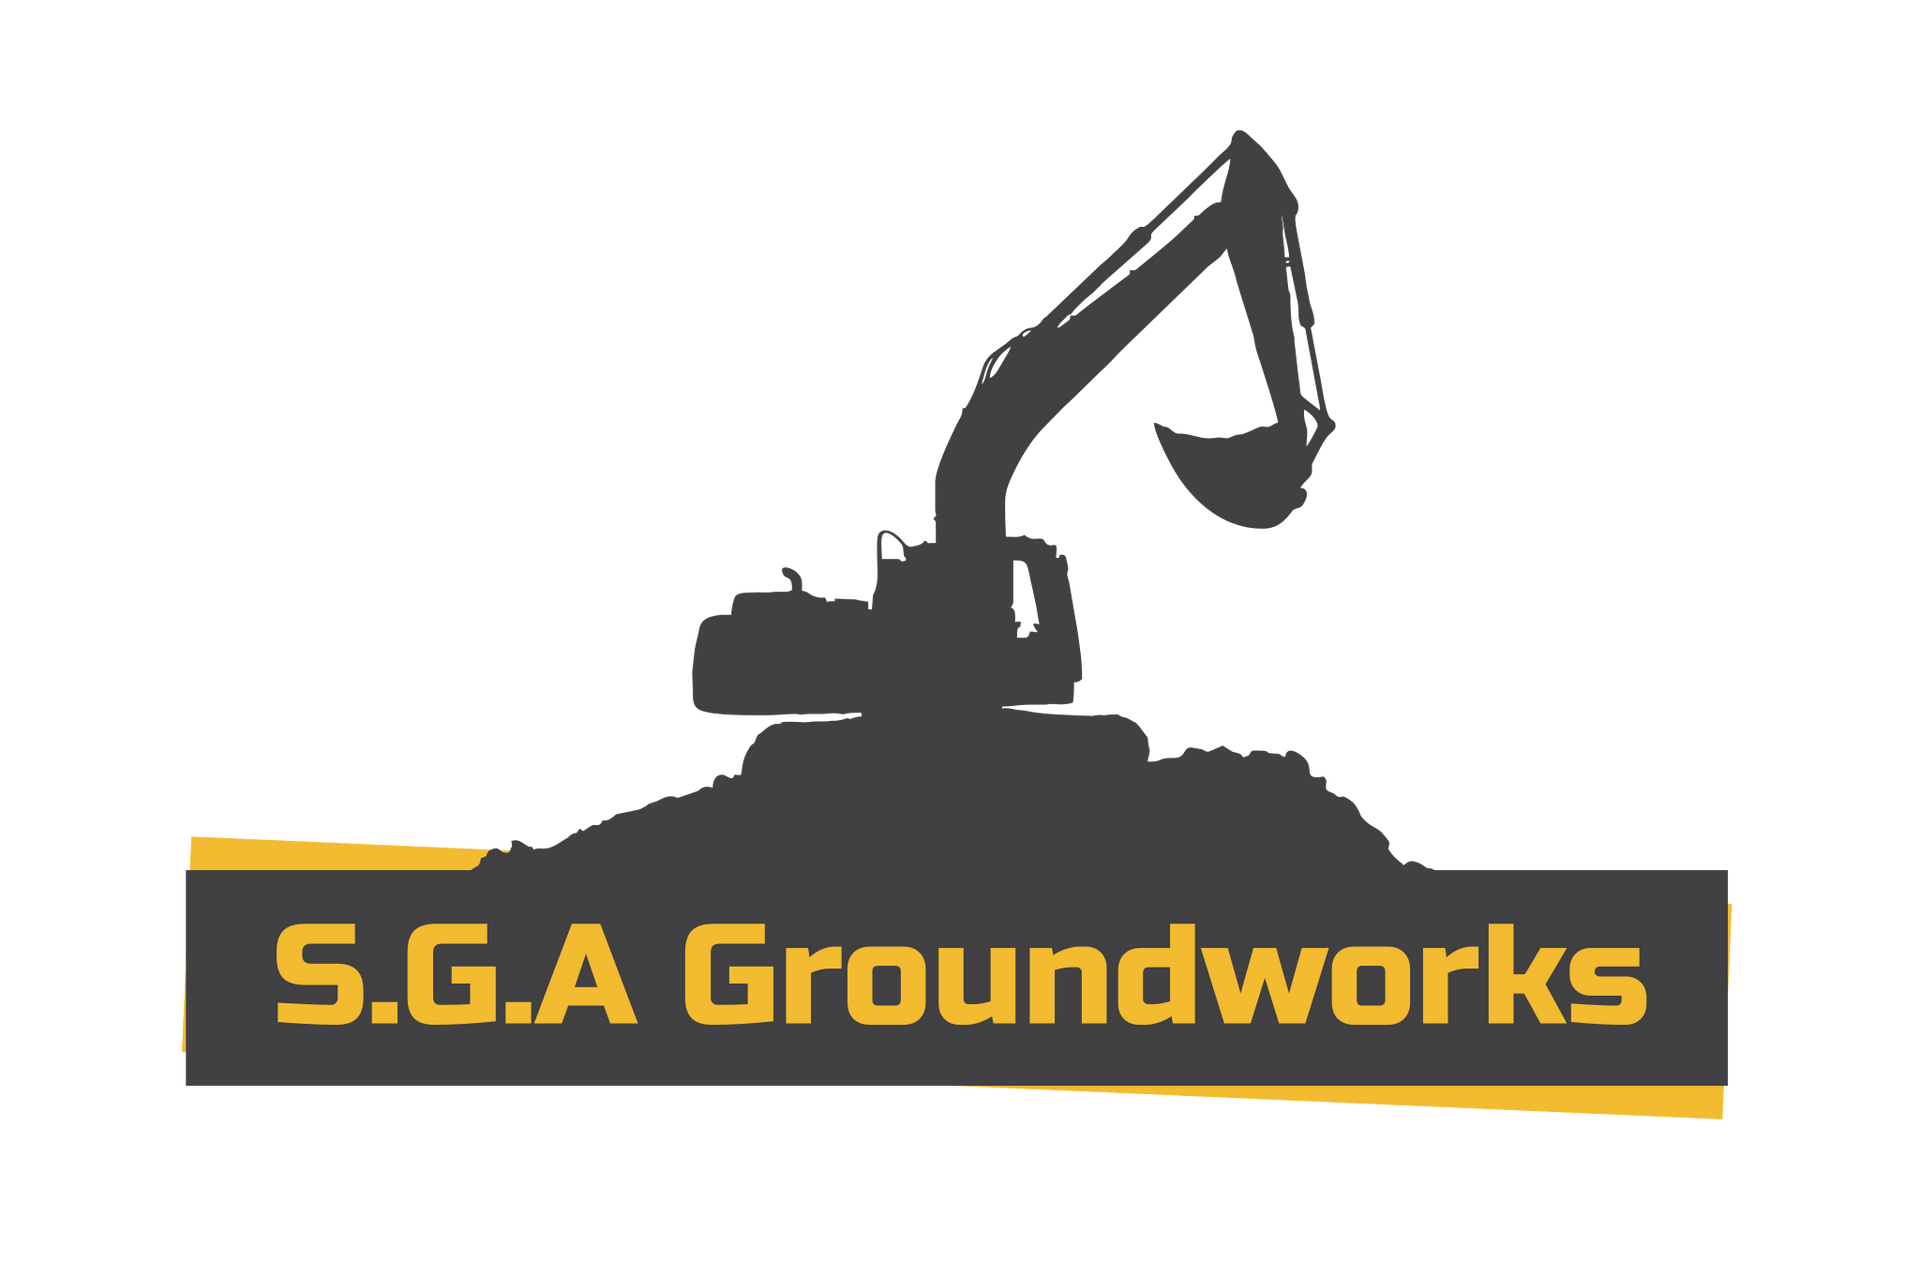 S.G.A Groundworks logo